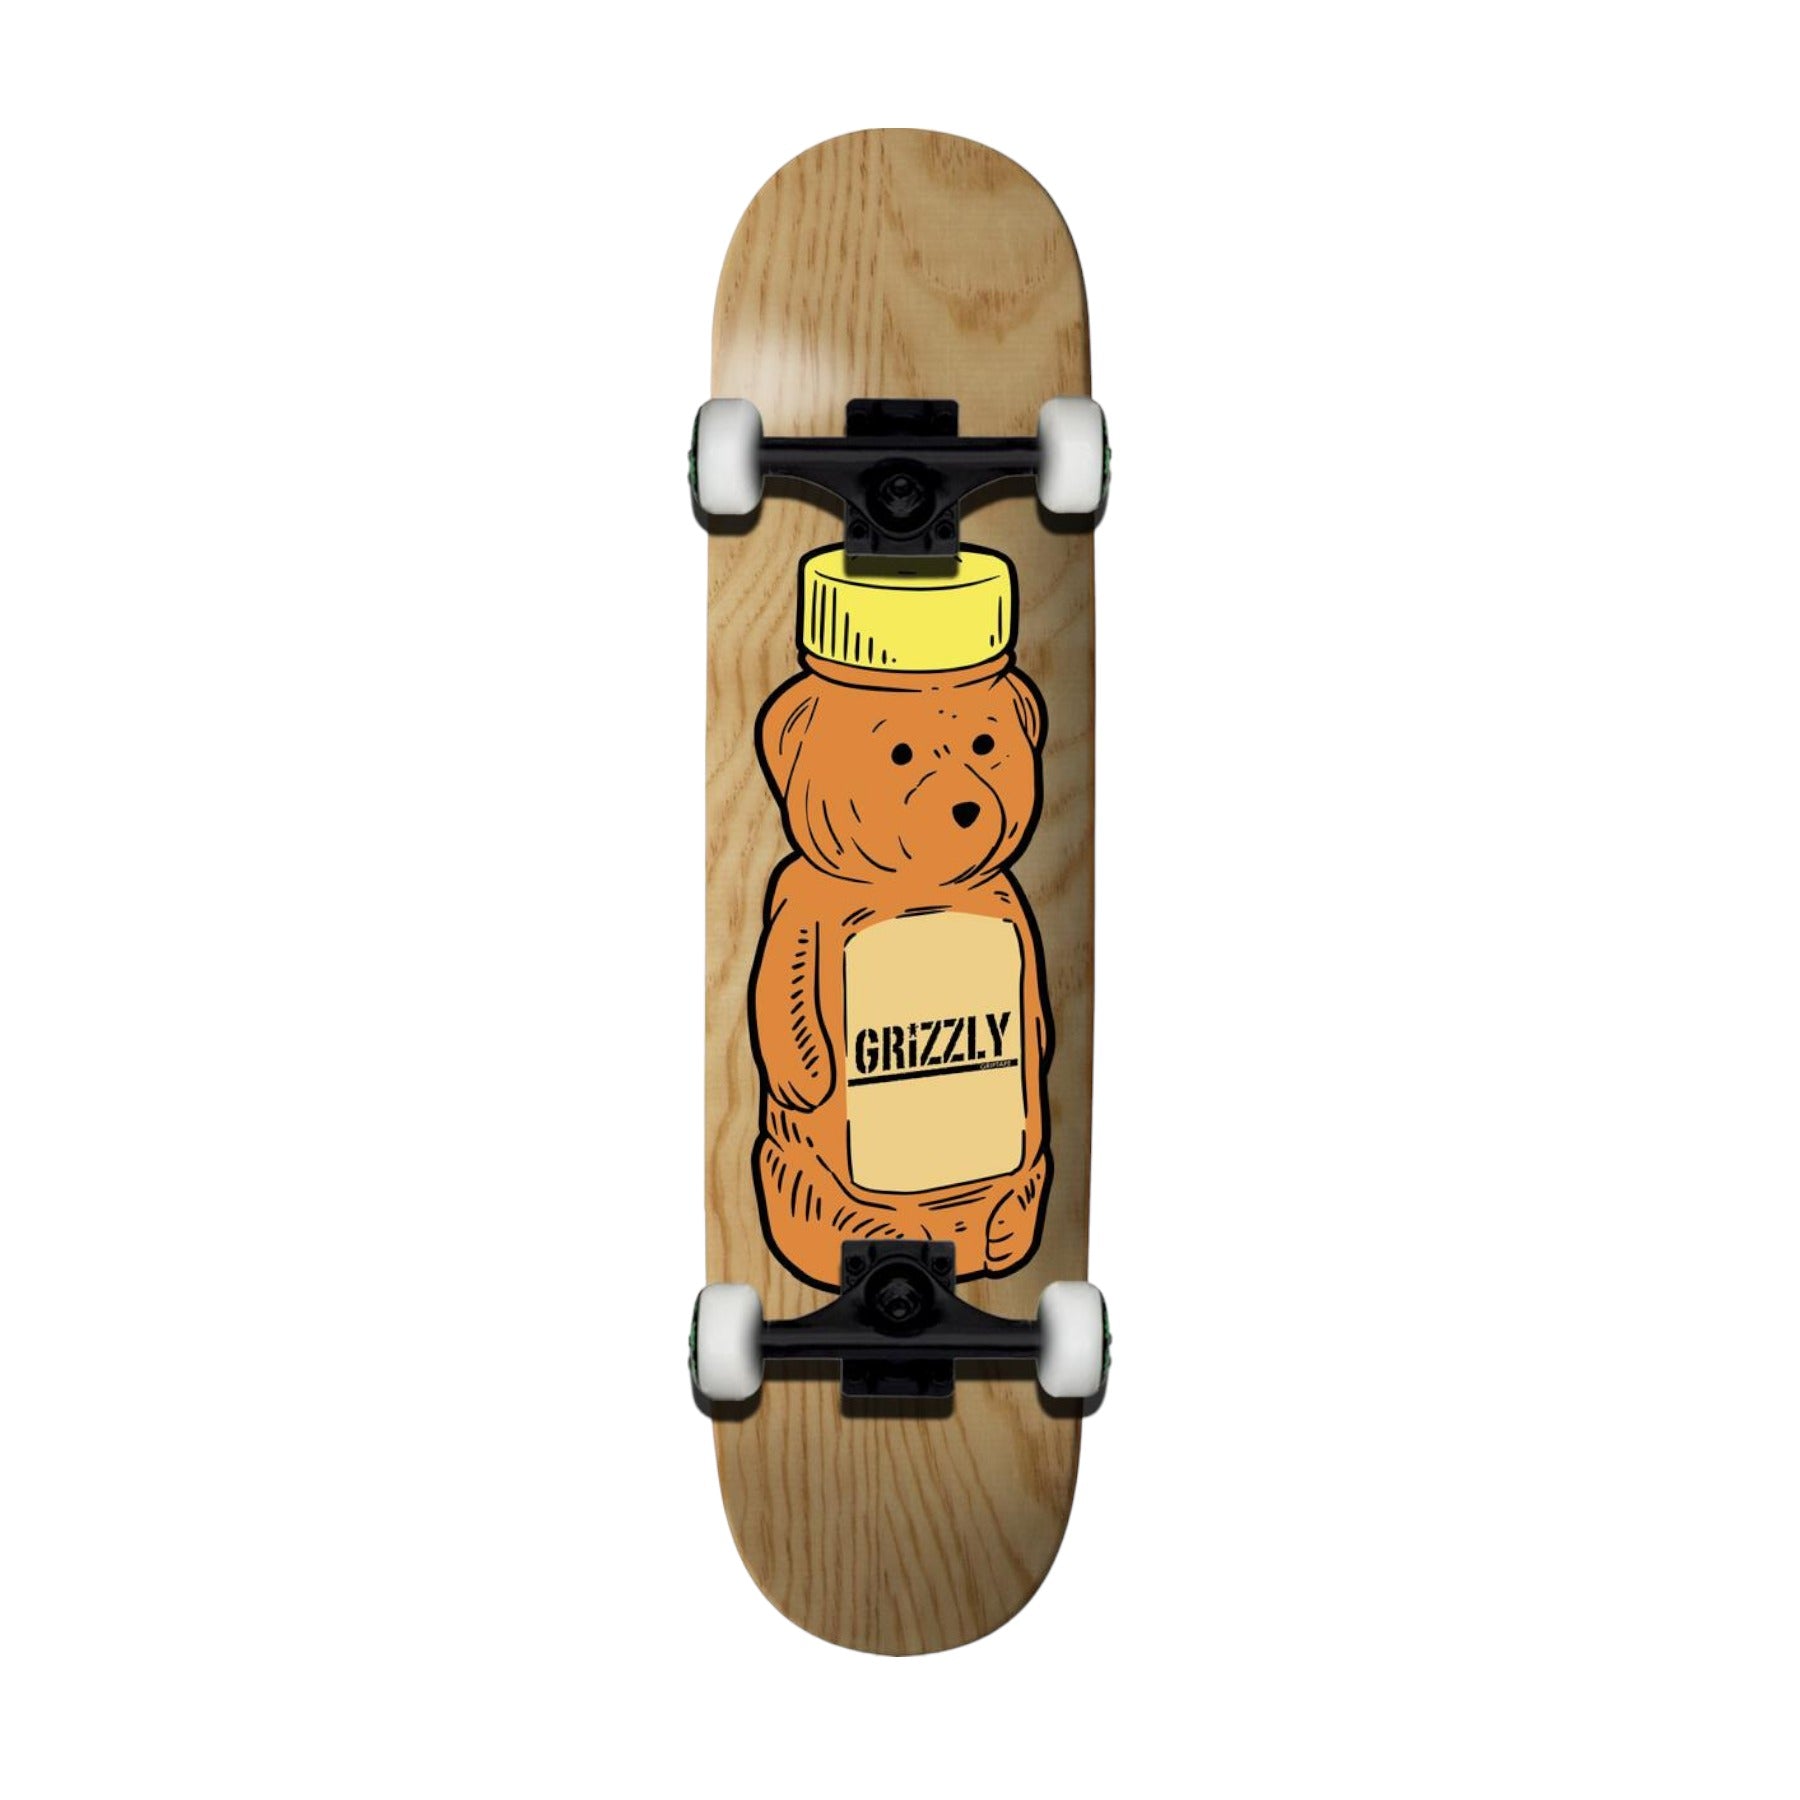 Grizzly Maple Syrup Skateboard Complete